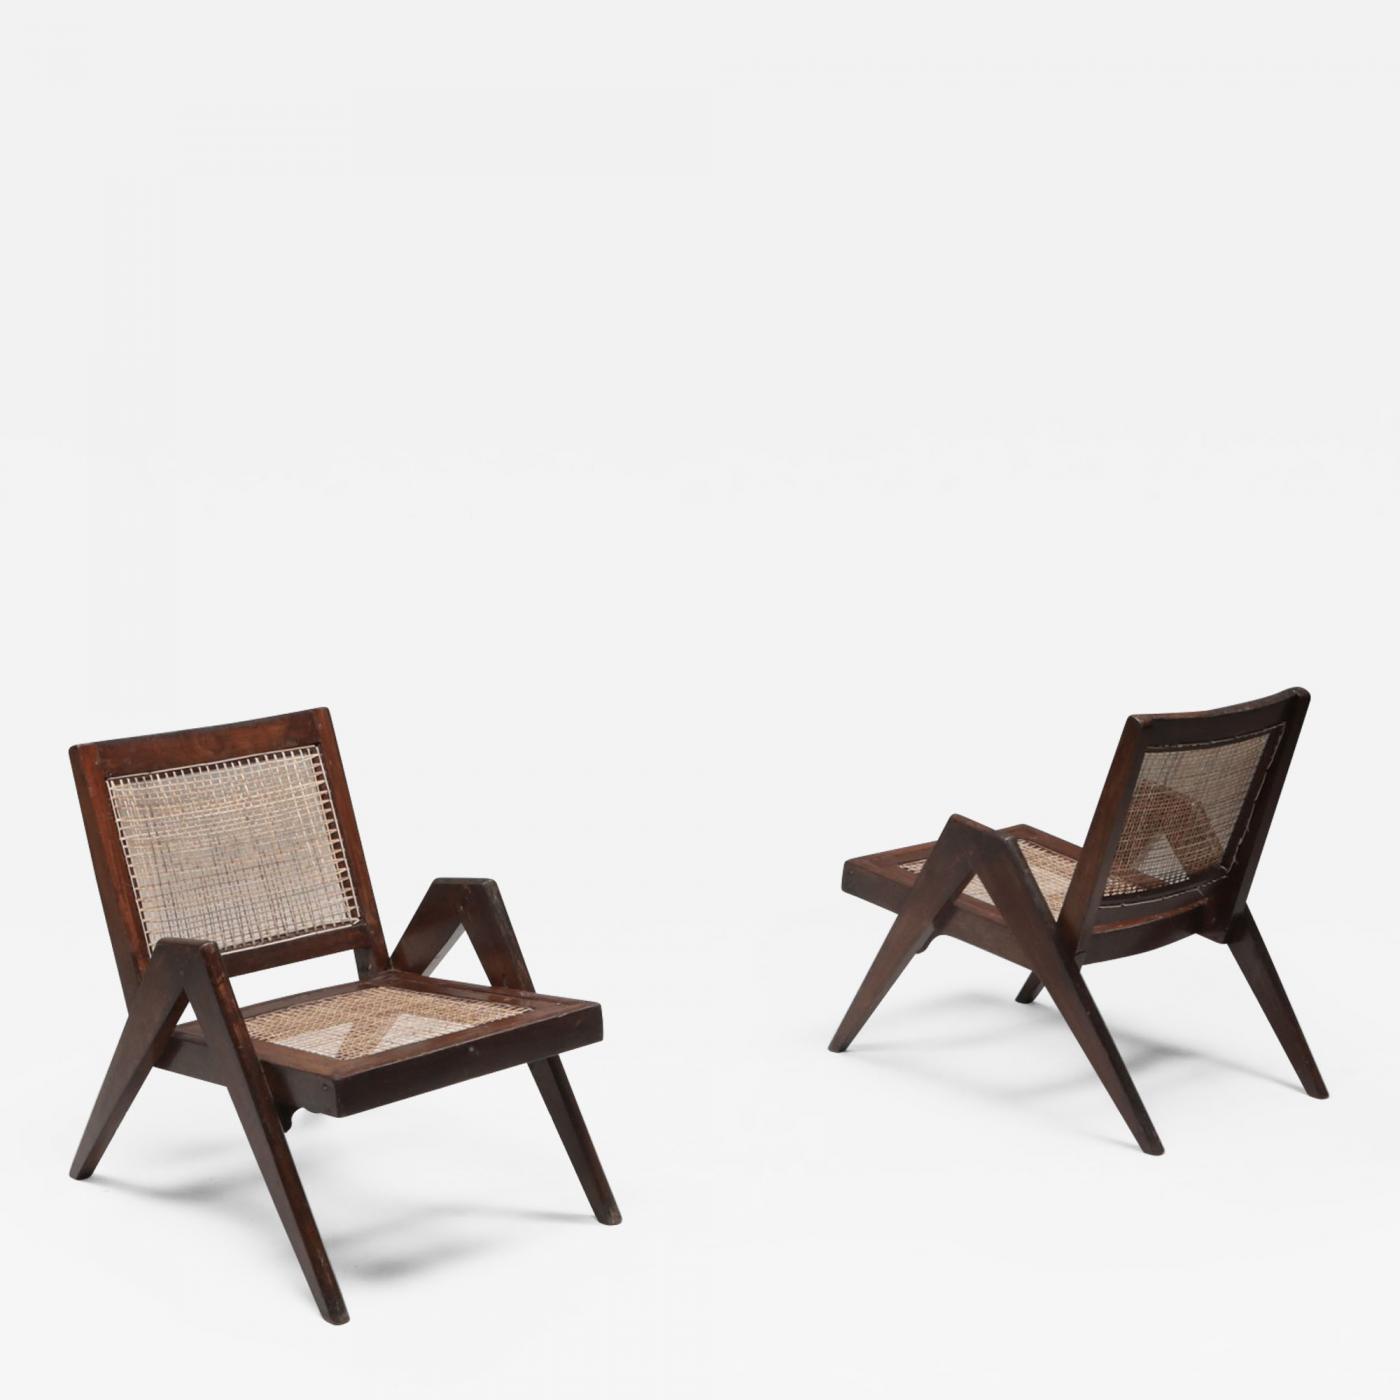 Pierre Jeanneret - Easy Chairs by Jeanneret, Chandigarh - 1955